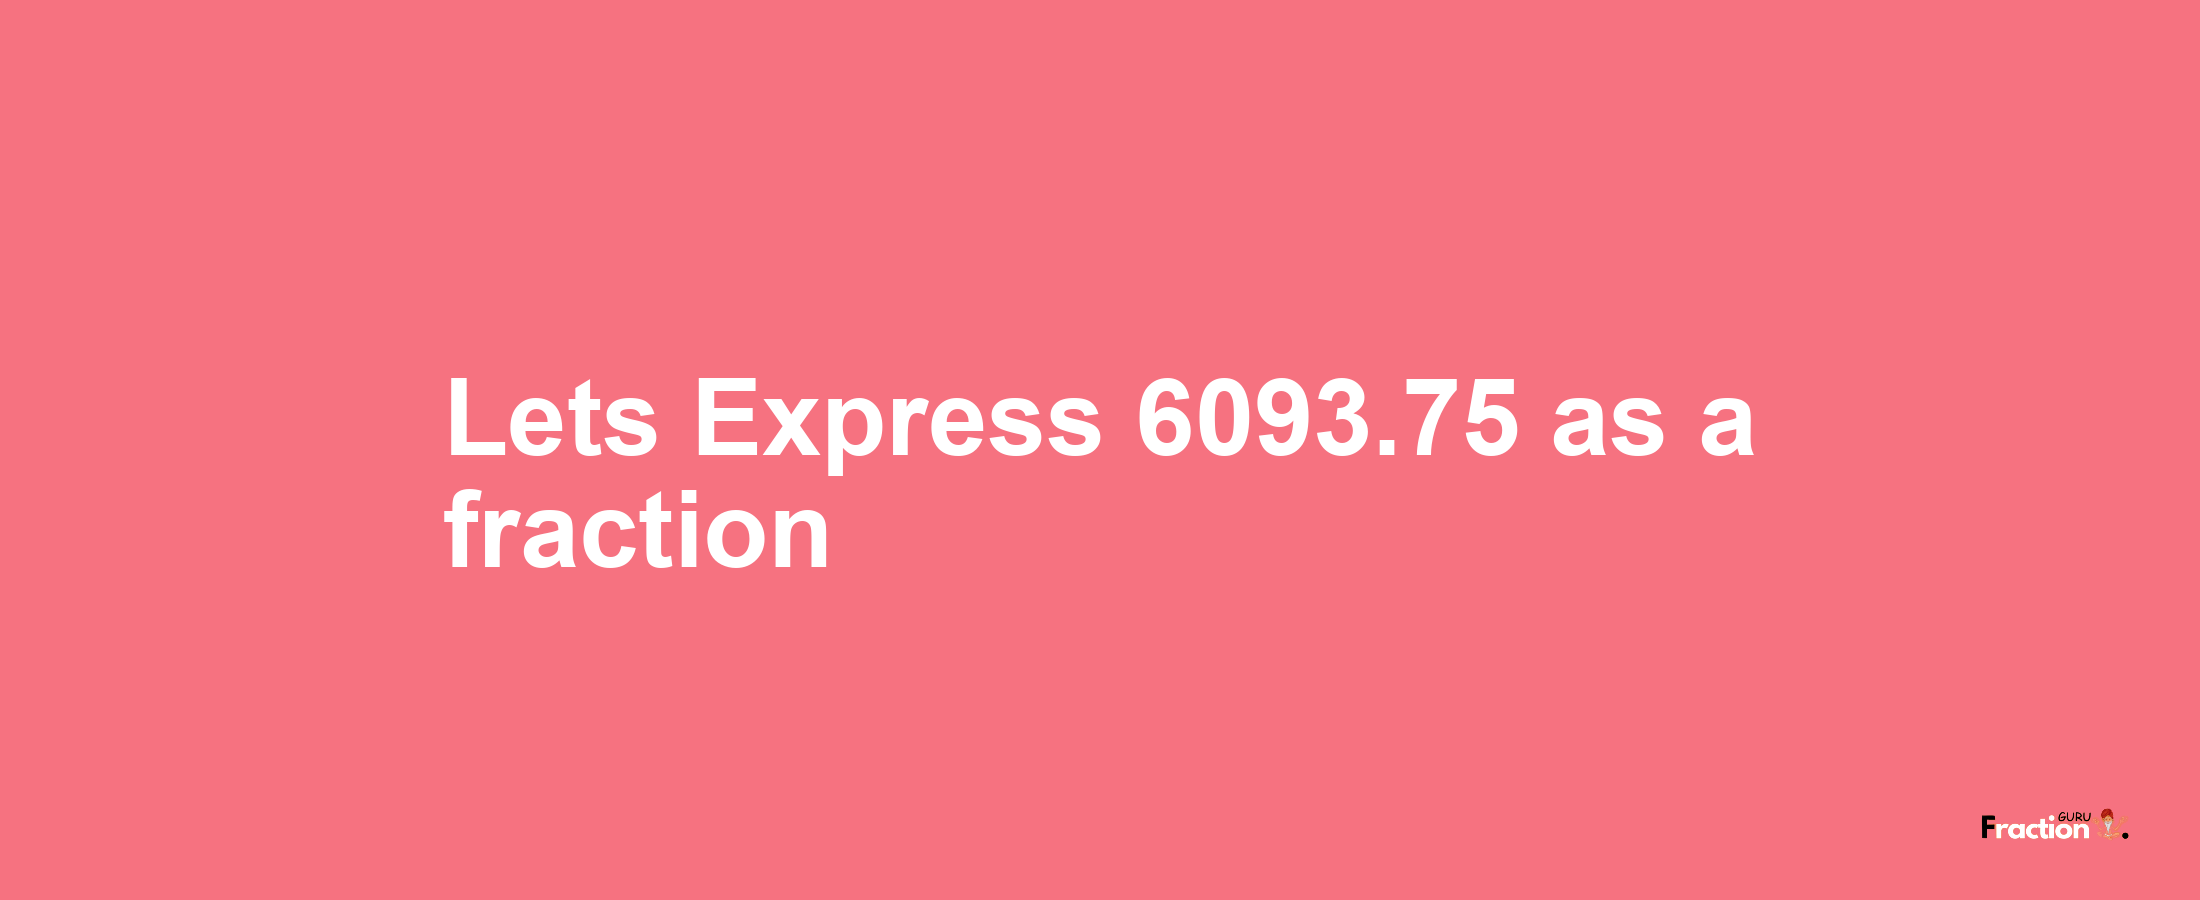 Lets Express 6093.75 as afraction